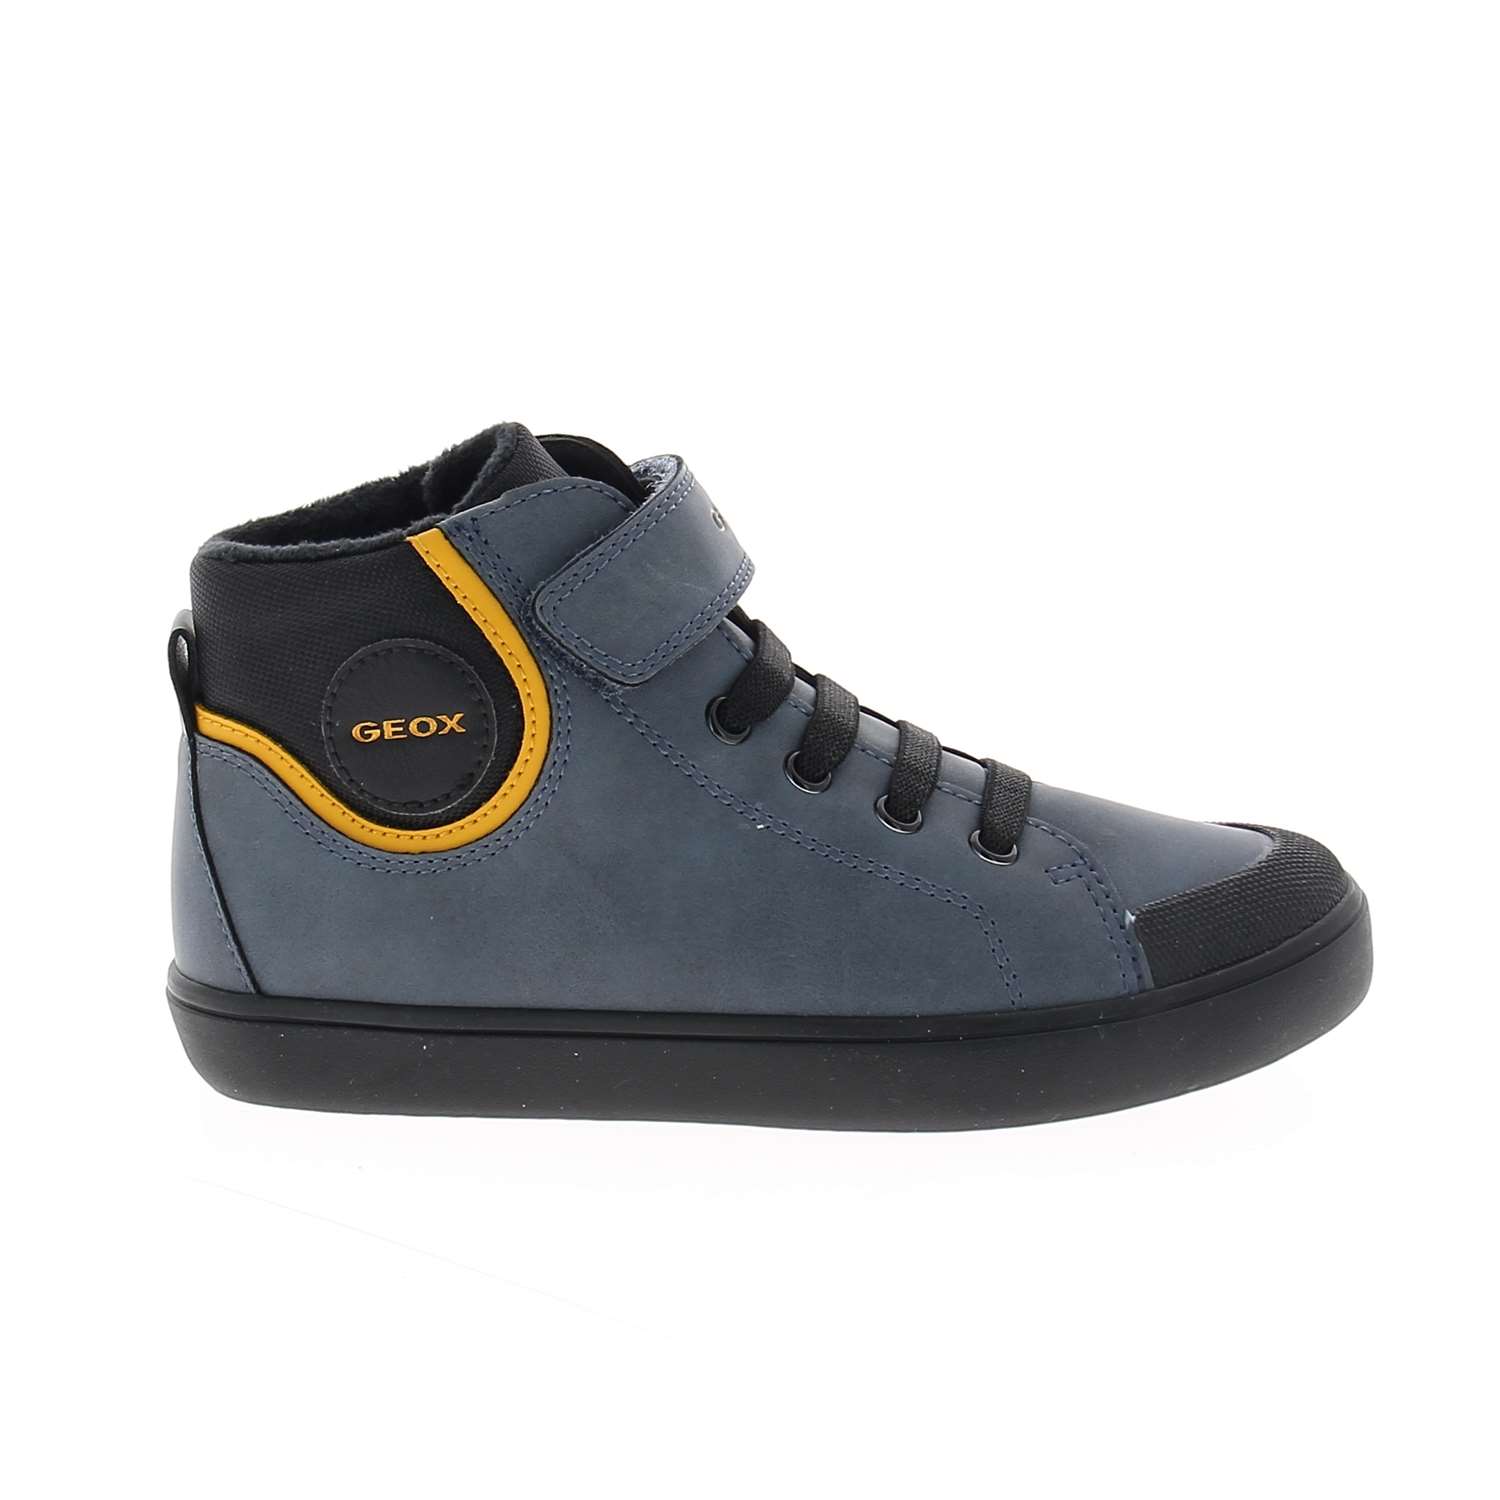 02 - GISLI BOY - GEOX - Chaussures montantes - Synthétique